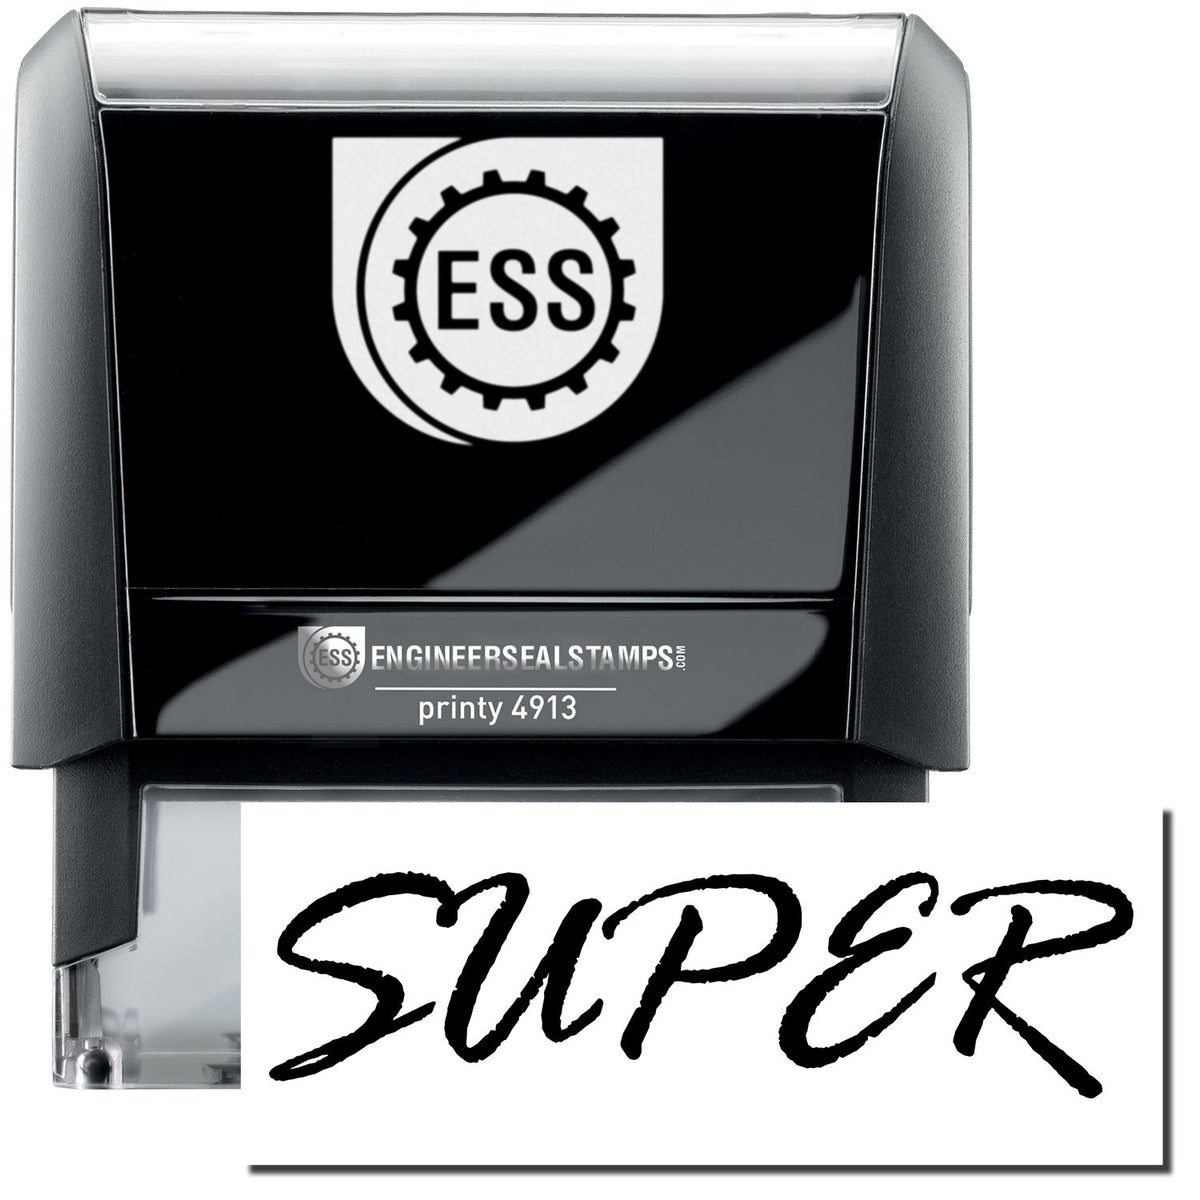 A self-inking stamp with a stamped image showing how the text &quot;SUPER&quot; in a large cursive font is displayed by it.